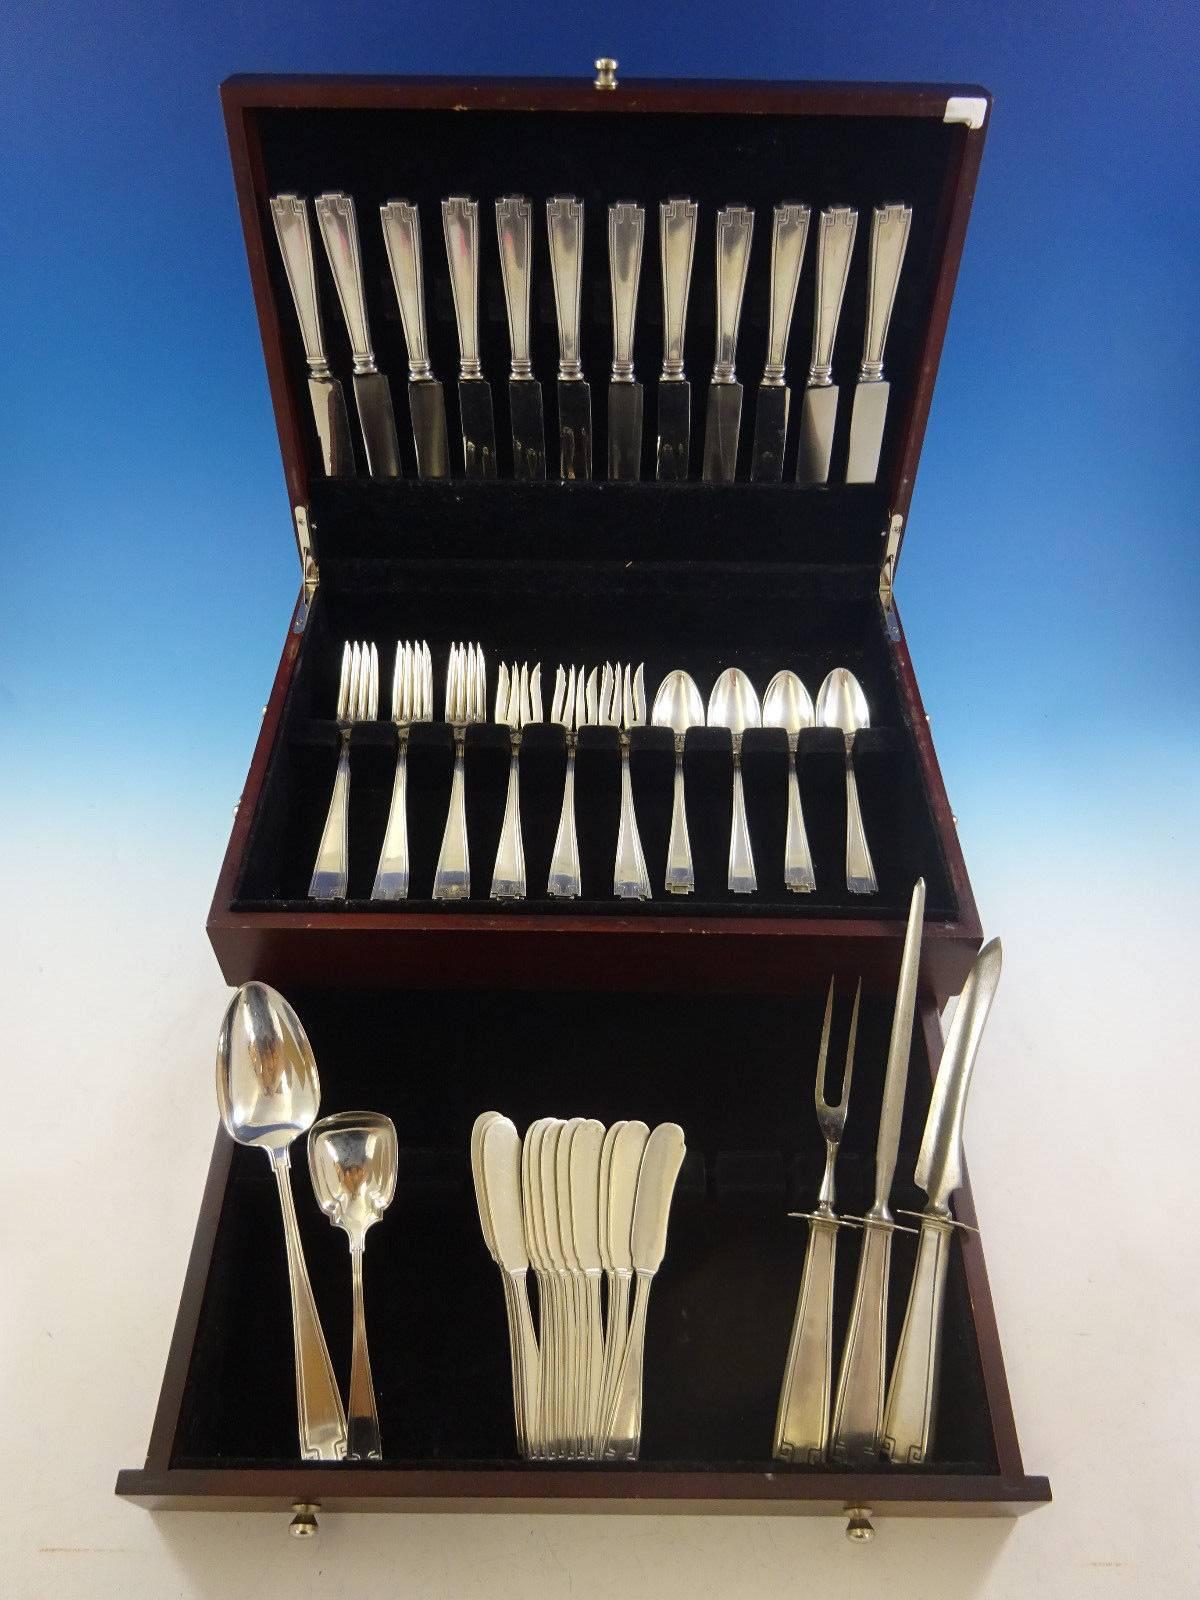 Etruscan by Gorham sterling silver flatware set, 65 pieces. This set includes: 12 knives, 8 1/2